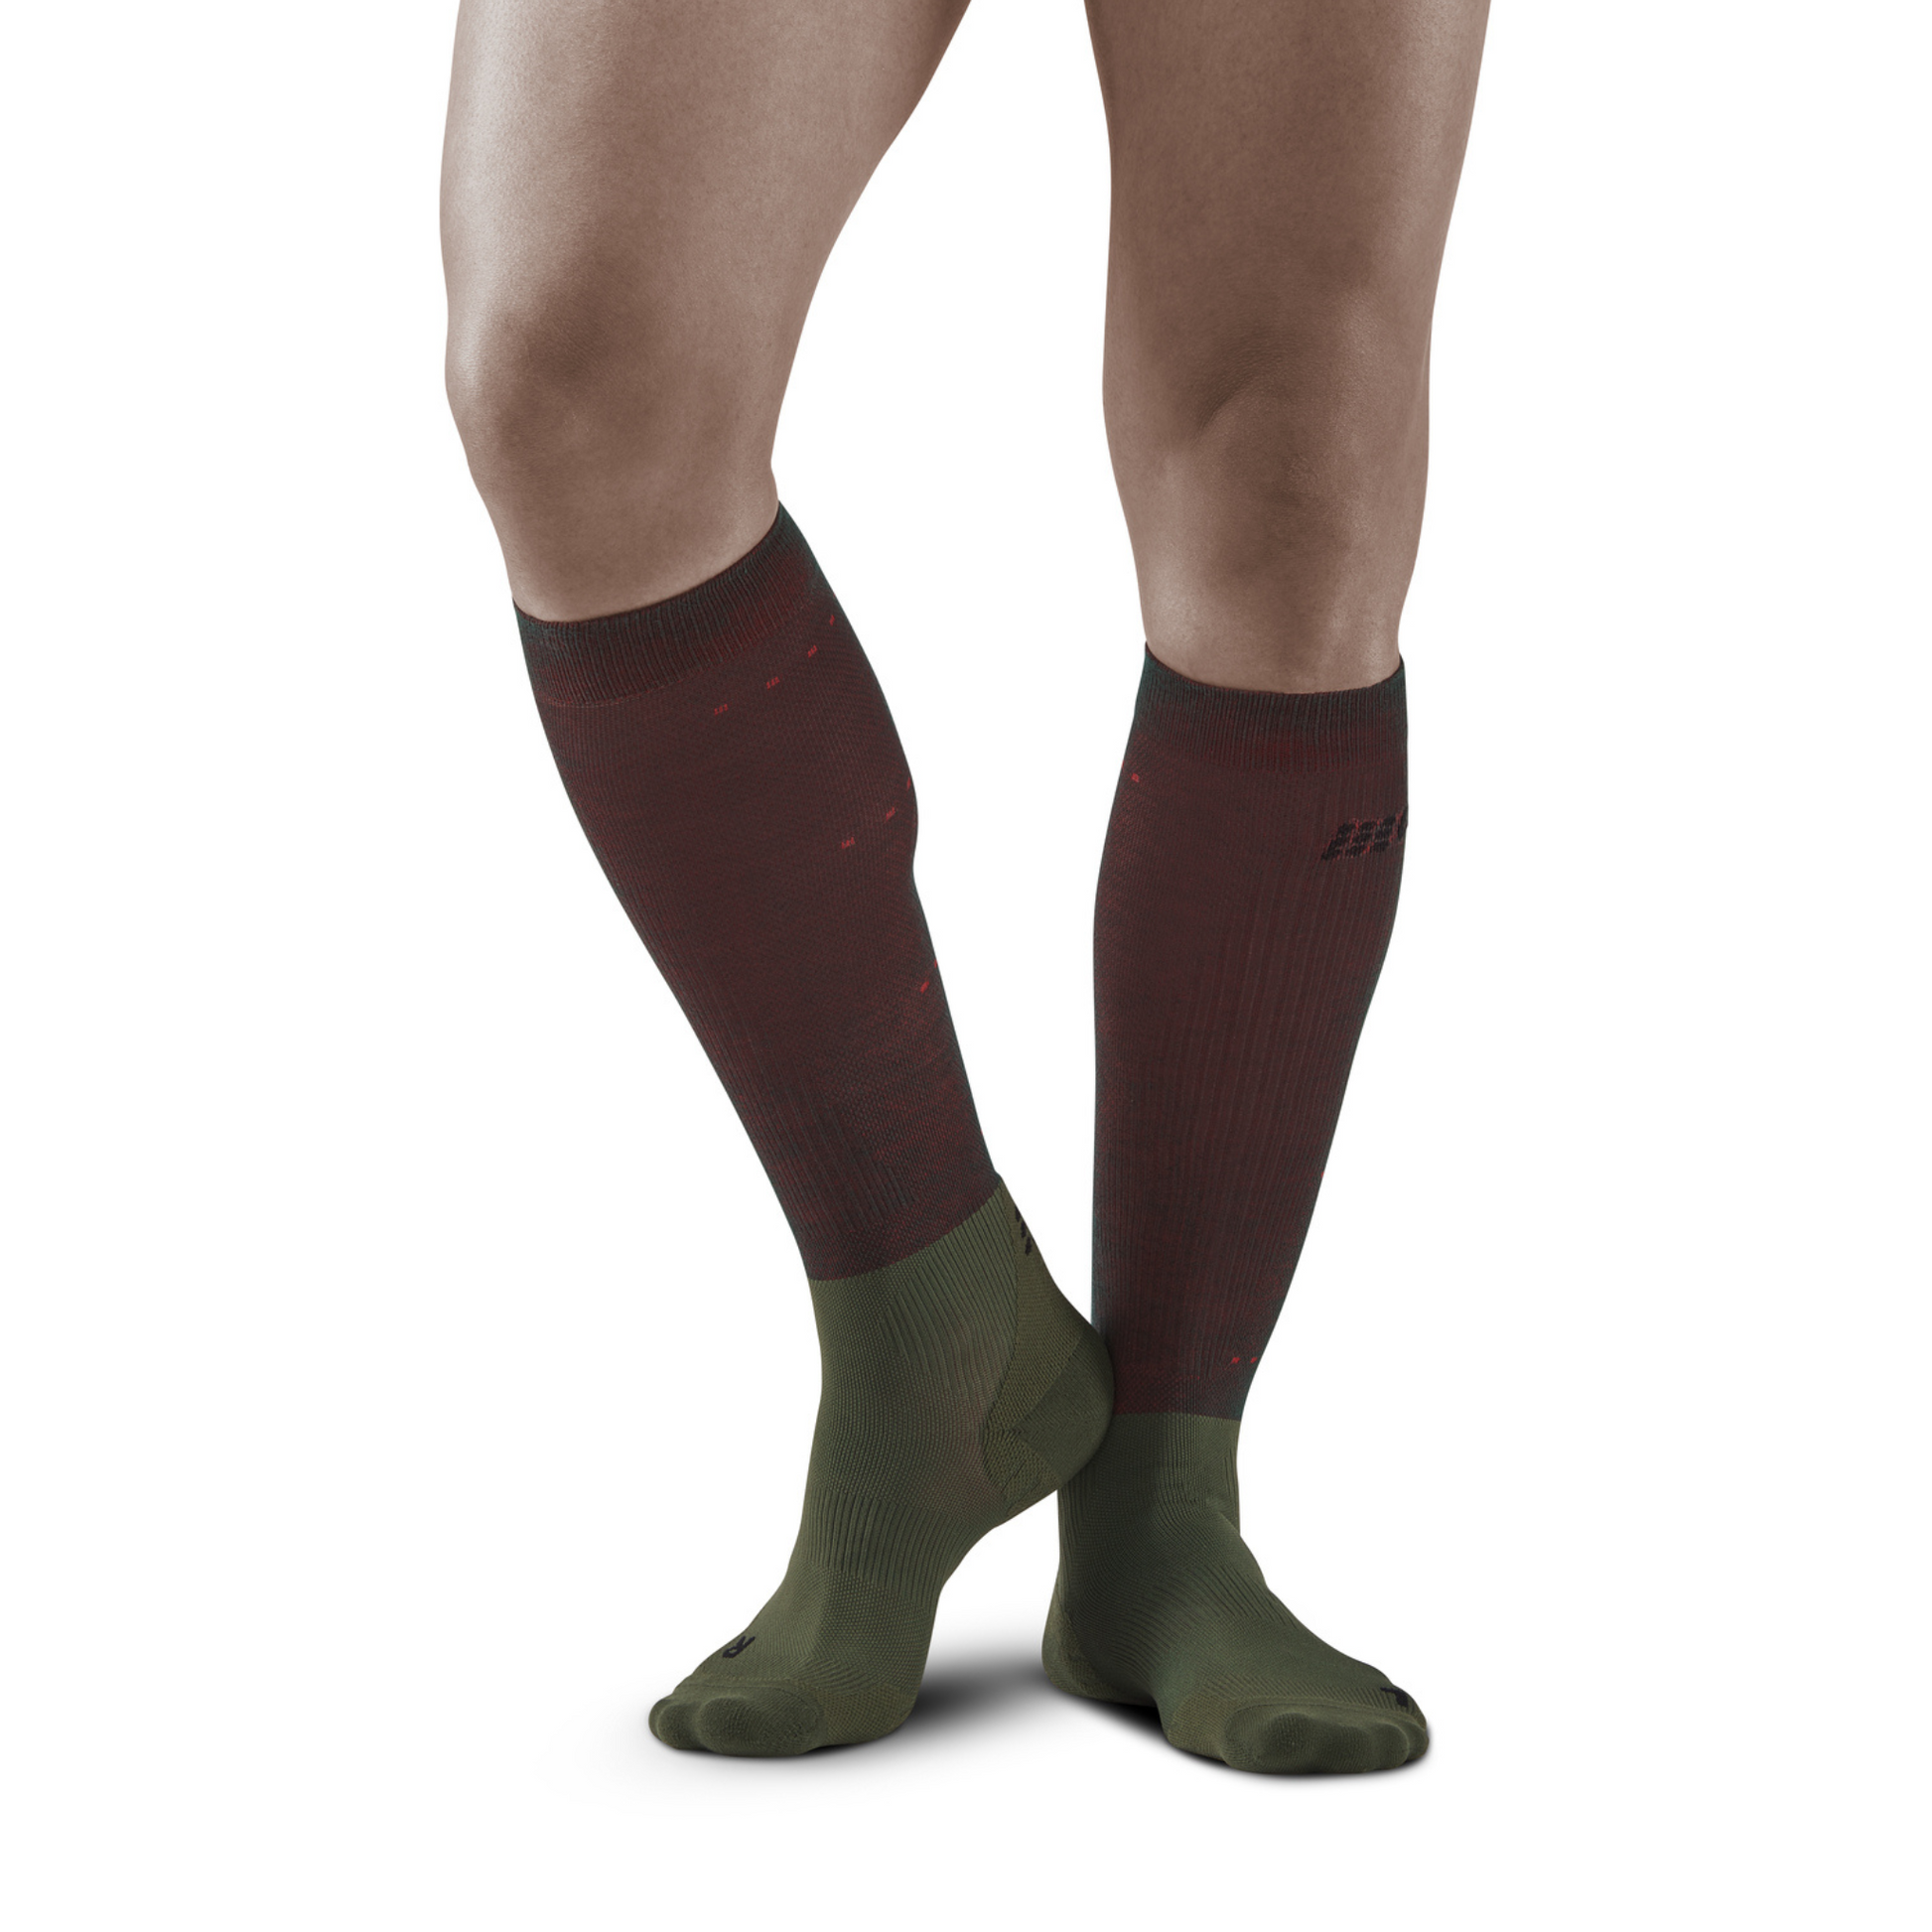 CEP Ultralight Knee-high Compression Sock